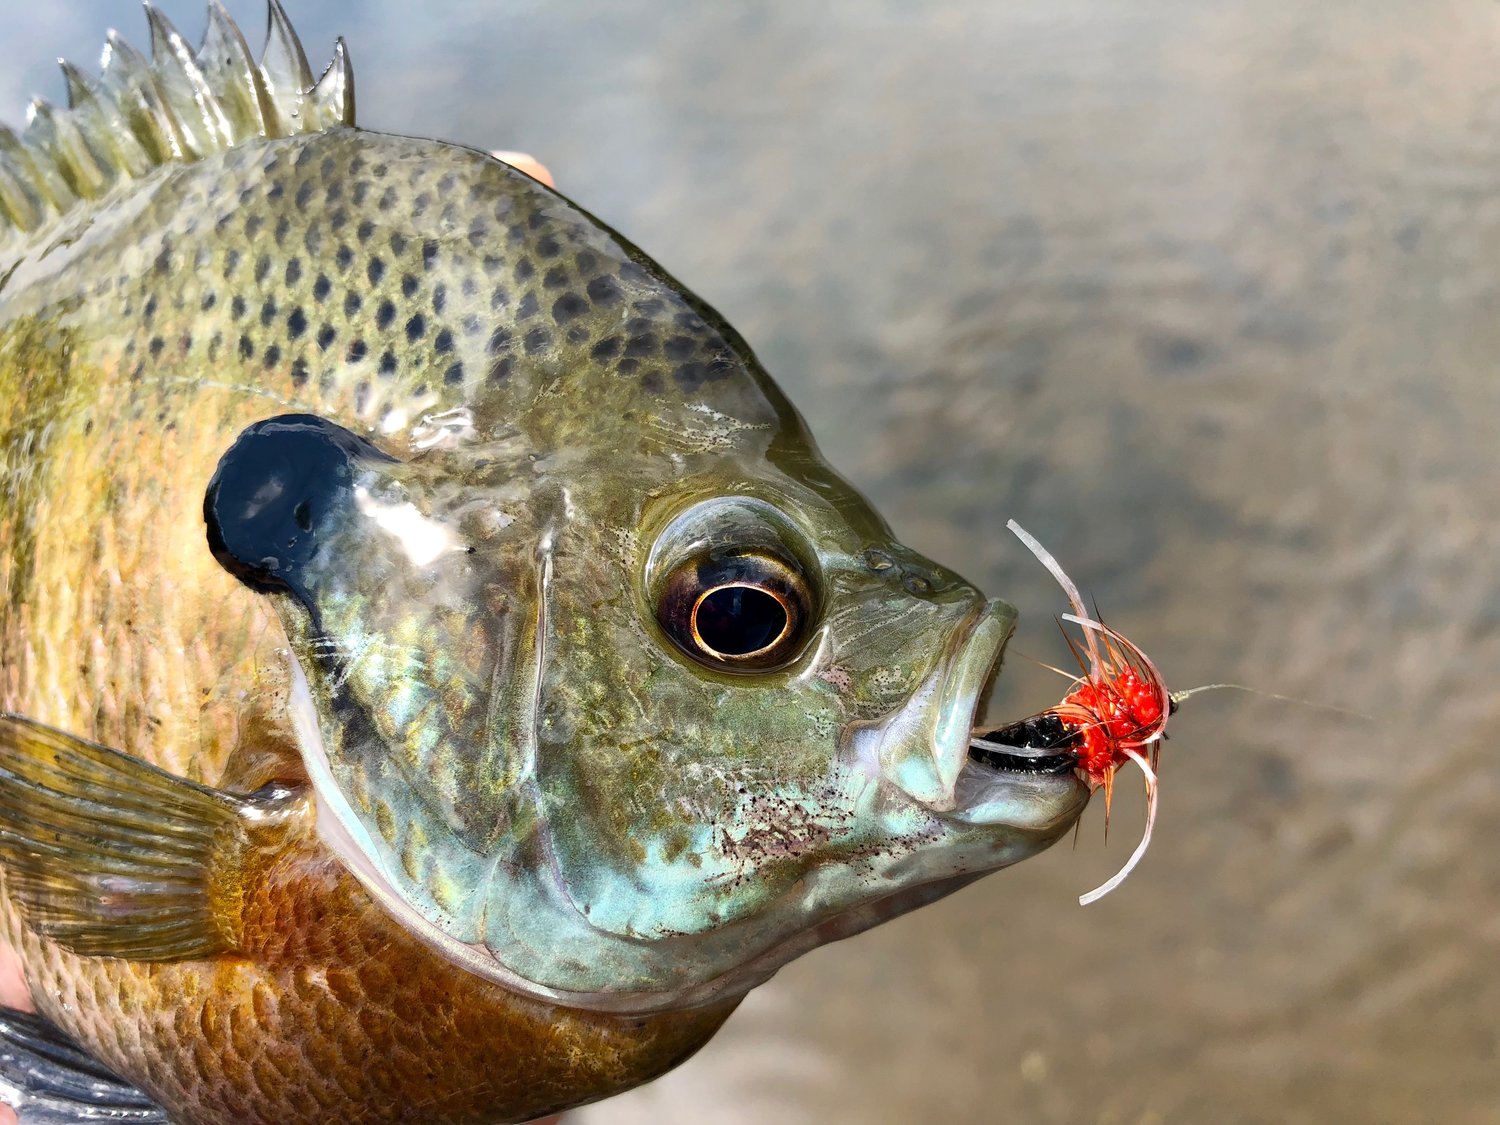 Bluegills With Pepperoni Anyone? — Panfish On The Fly